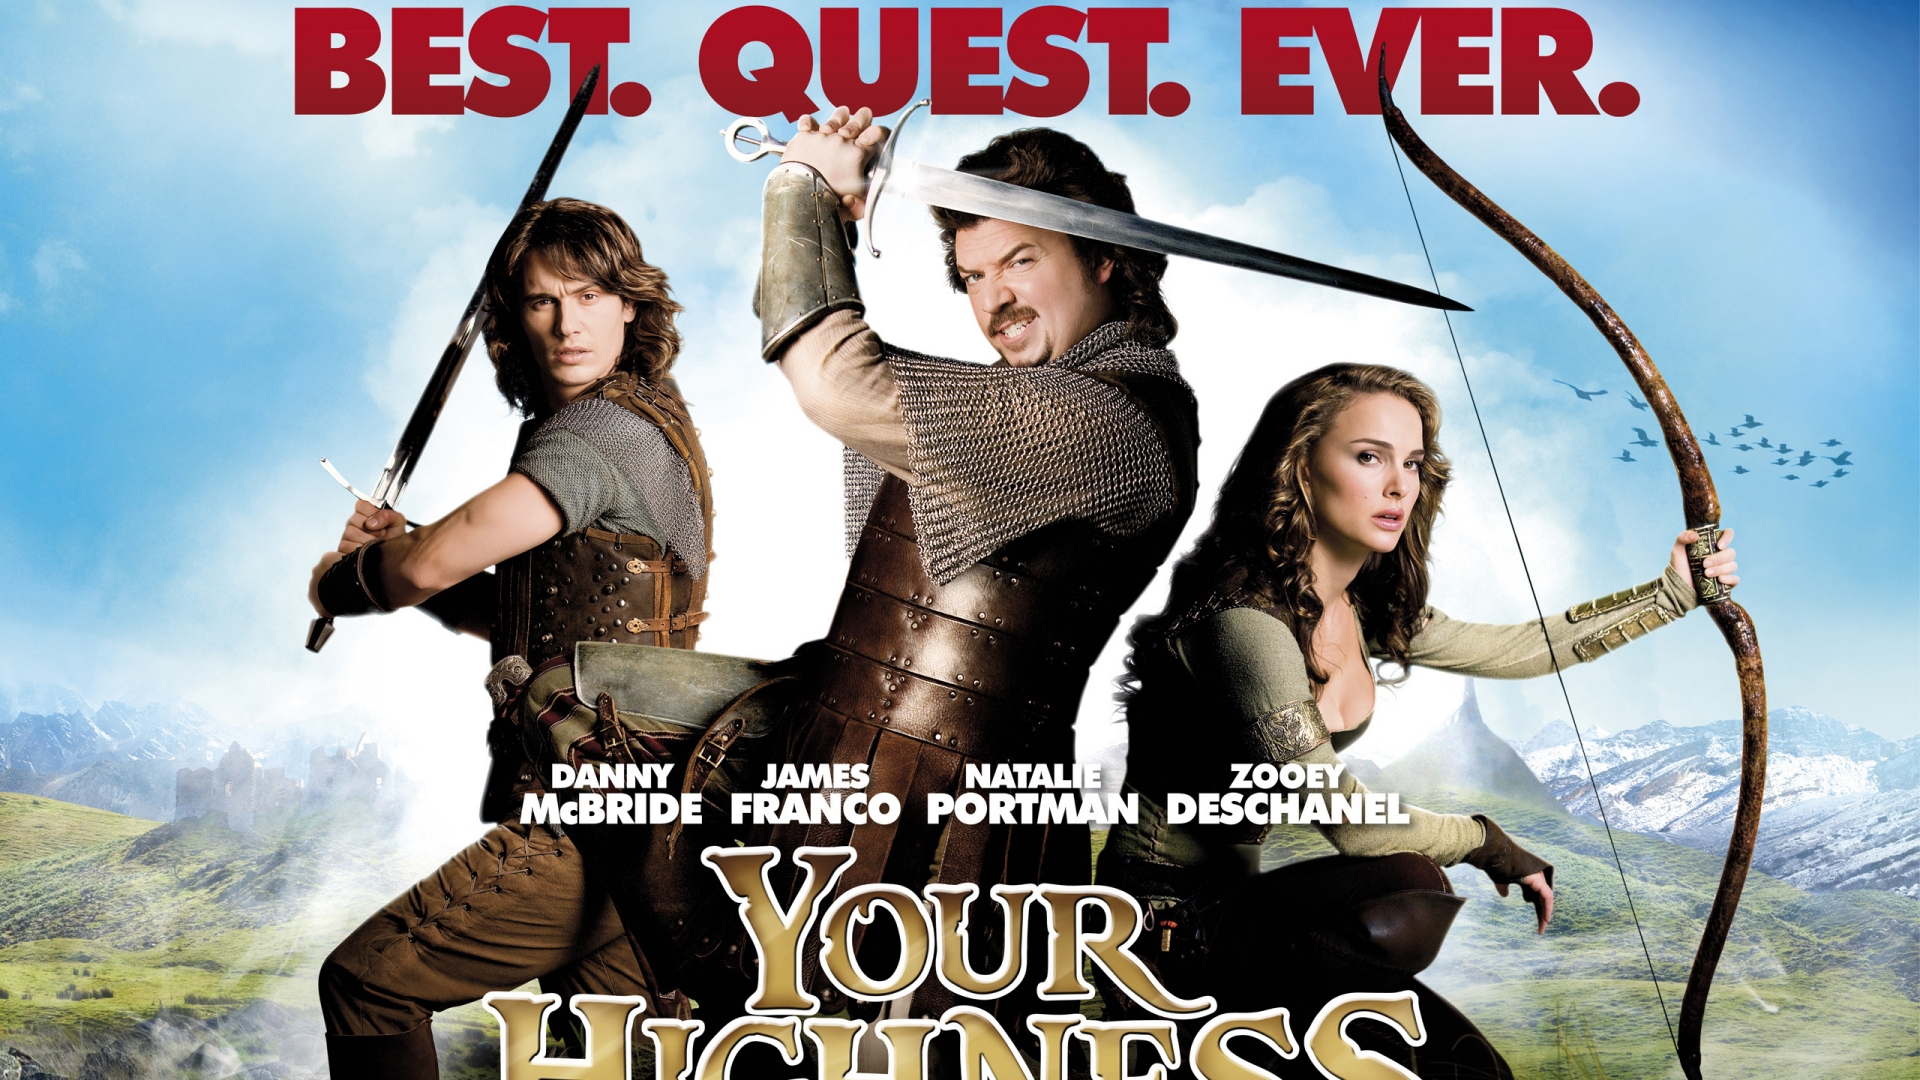 Your Highness Movie for 1920 x 1080 HDTV 1080p resolution